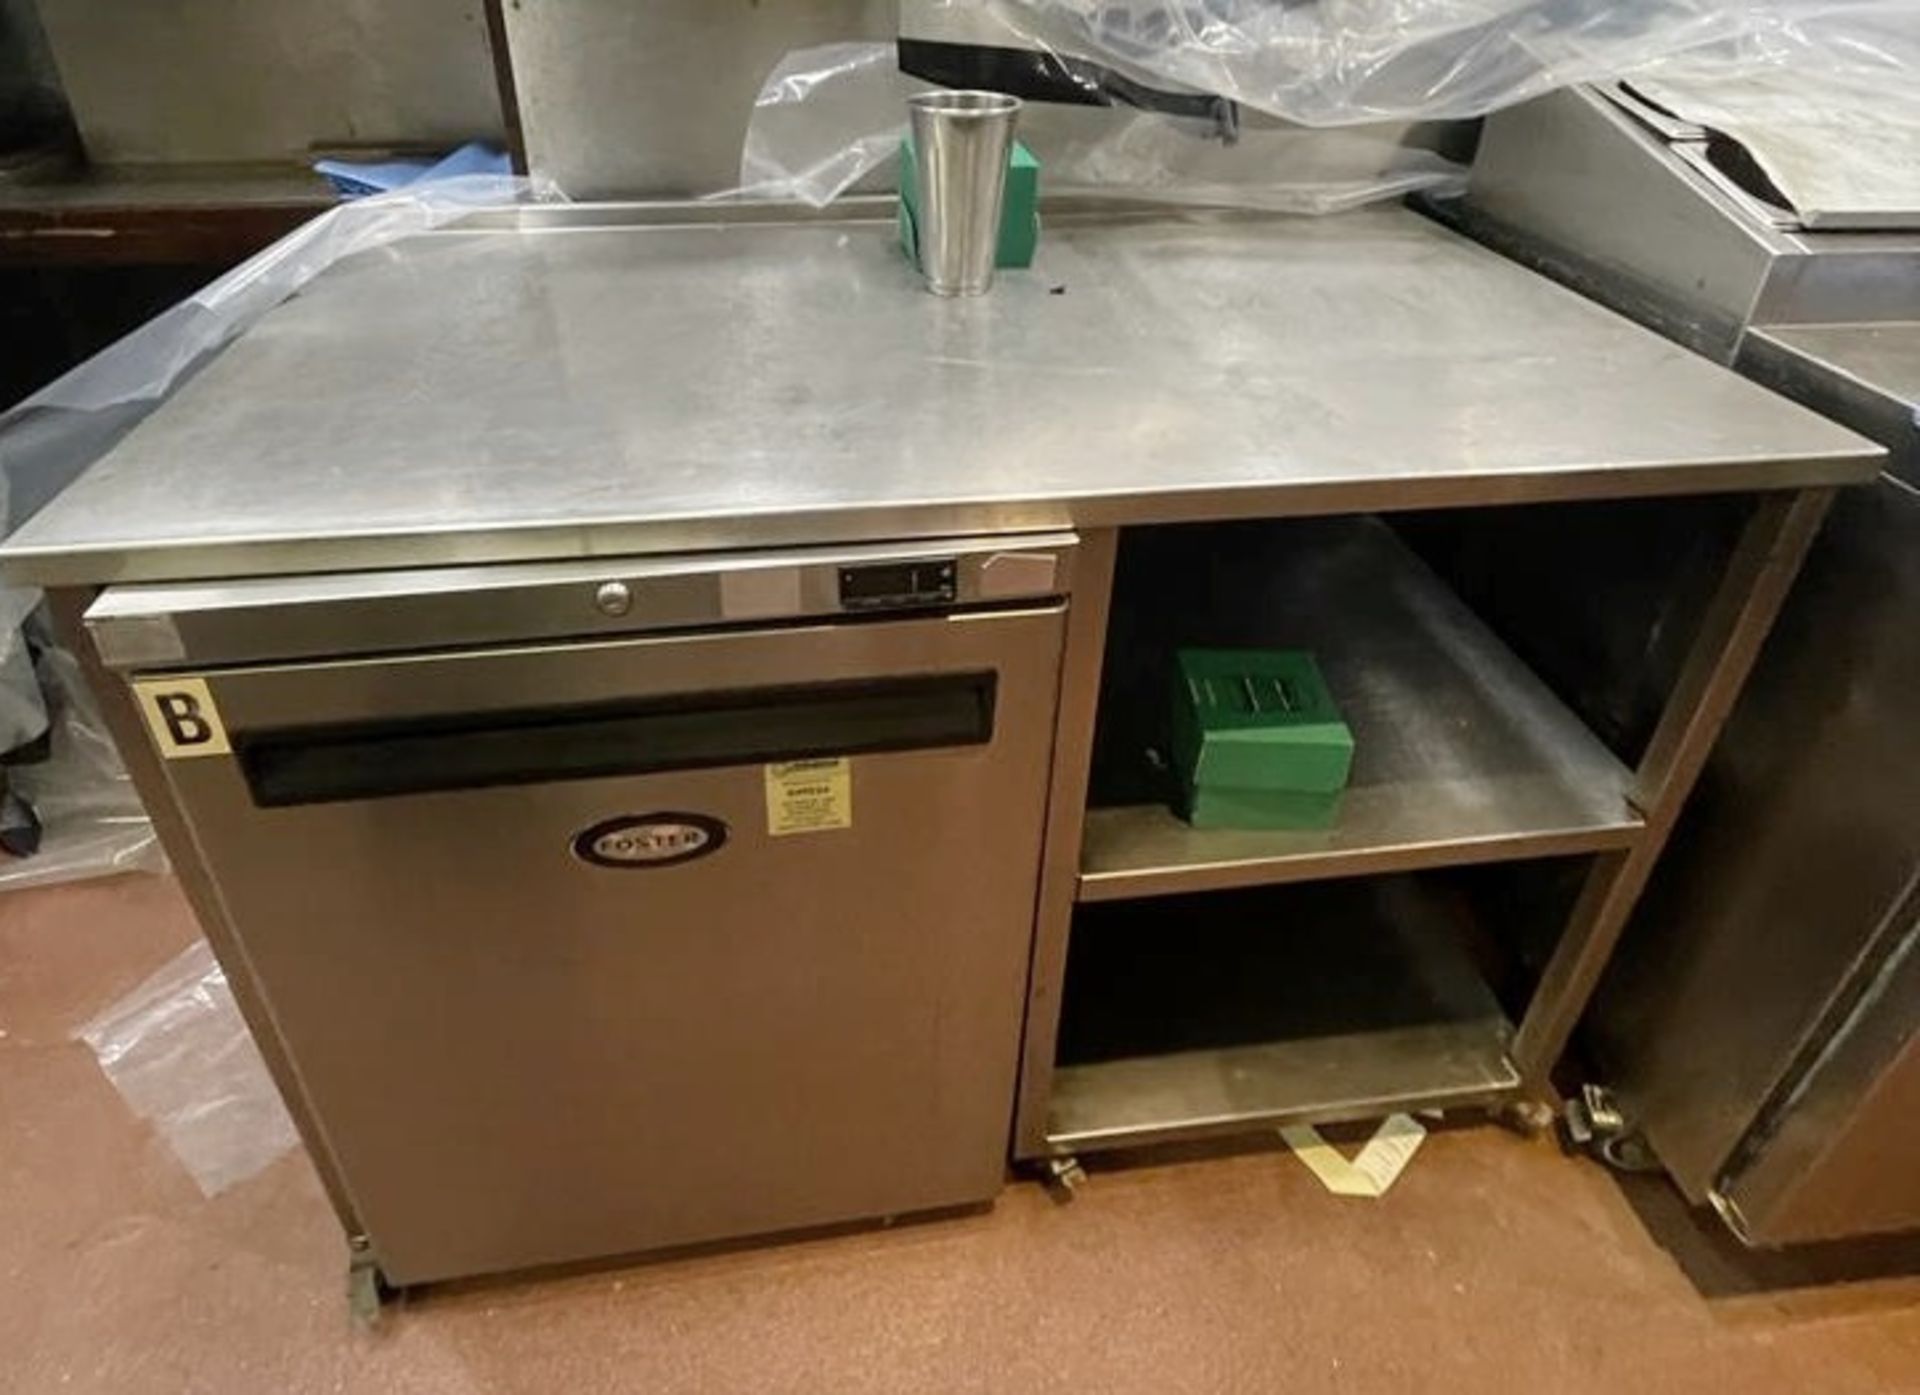 1 x Fosters Undercounter 60cm Freezer And Stainless Steel Prep Bench - From a Popular American Diner